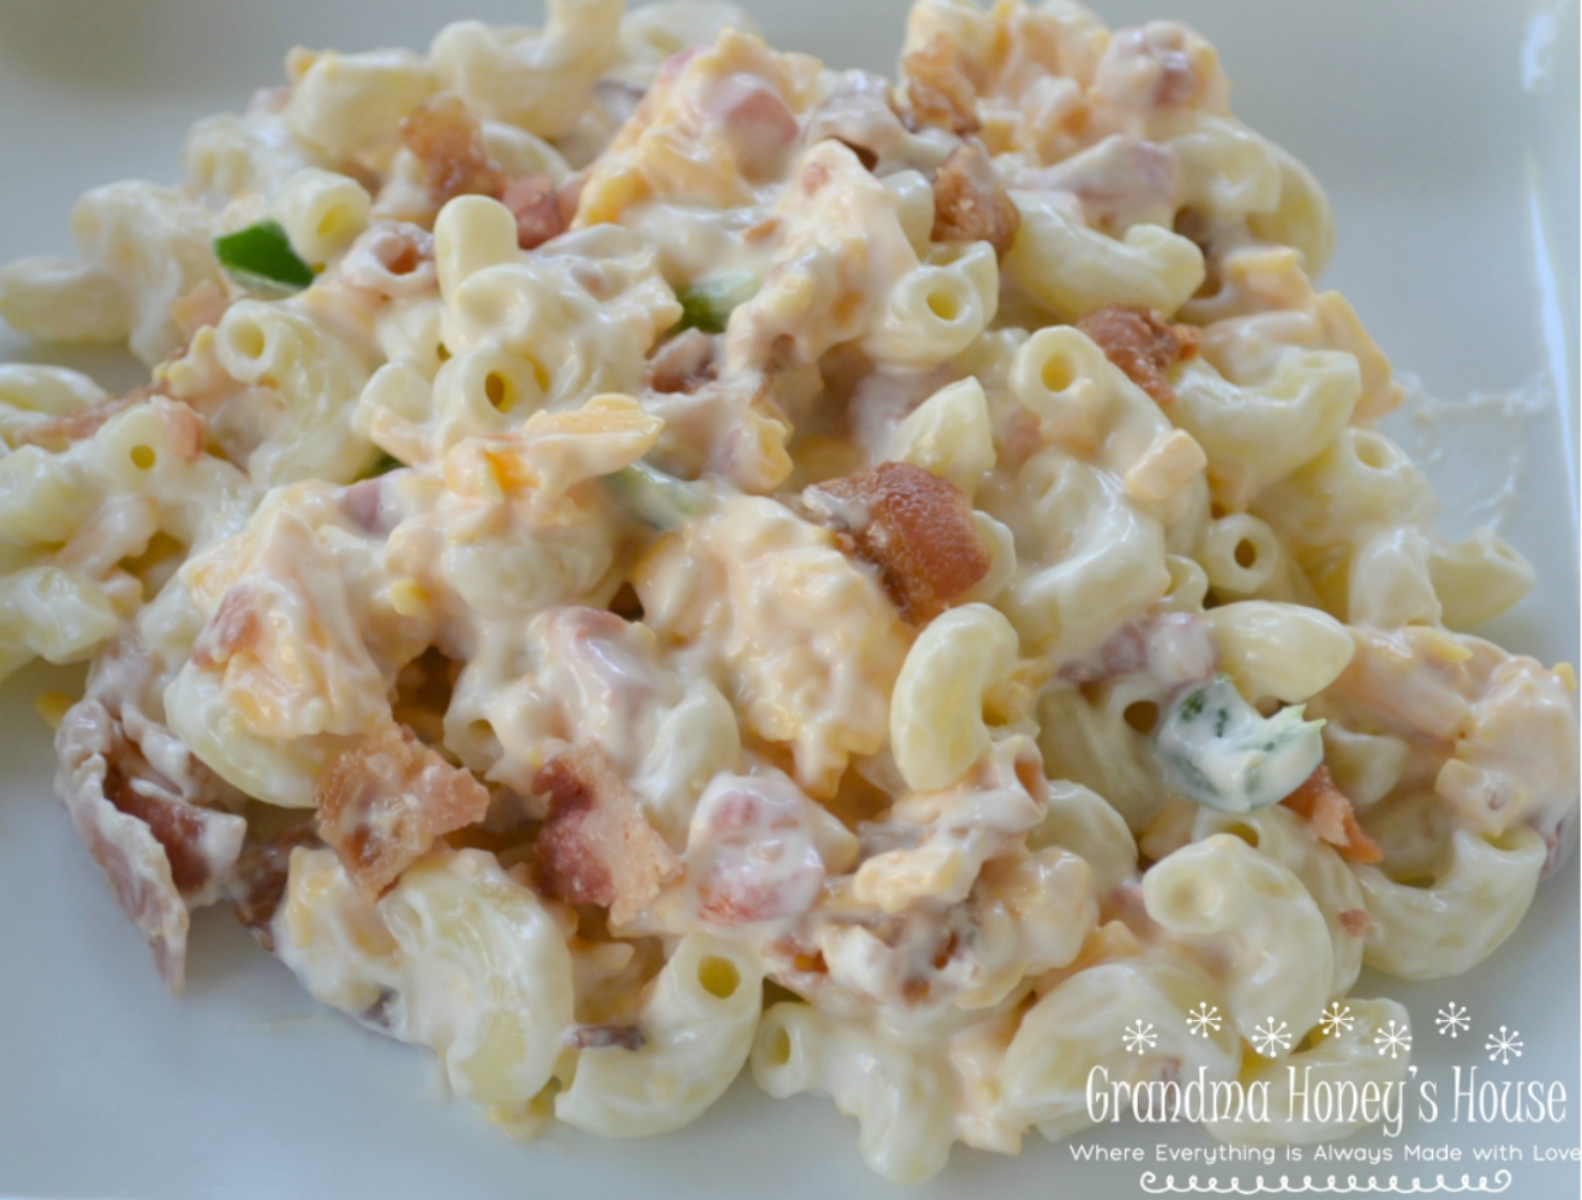 Pimento Bacon Macaroni Salad is the perfect southern style dish with a pimento cheese base, bacon, and a touch of heat from the jalapenos.